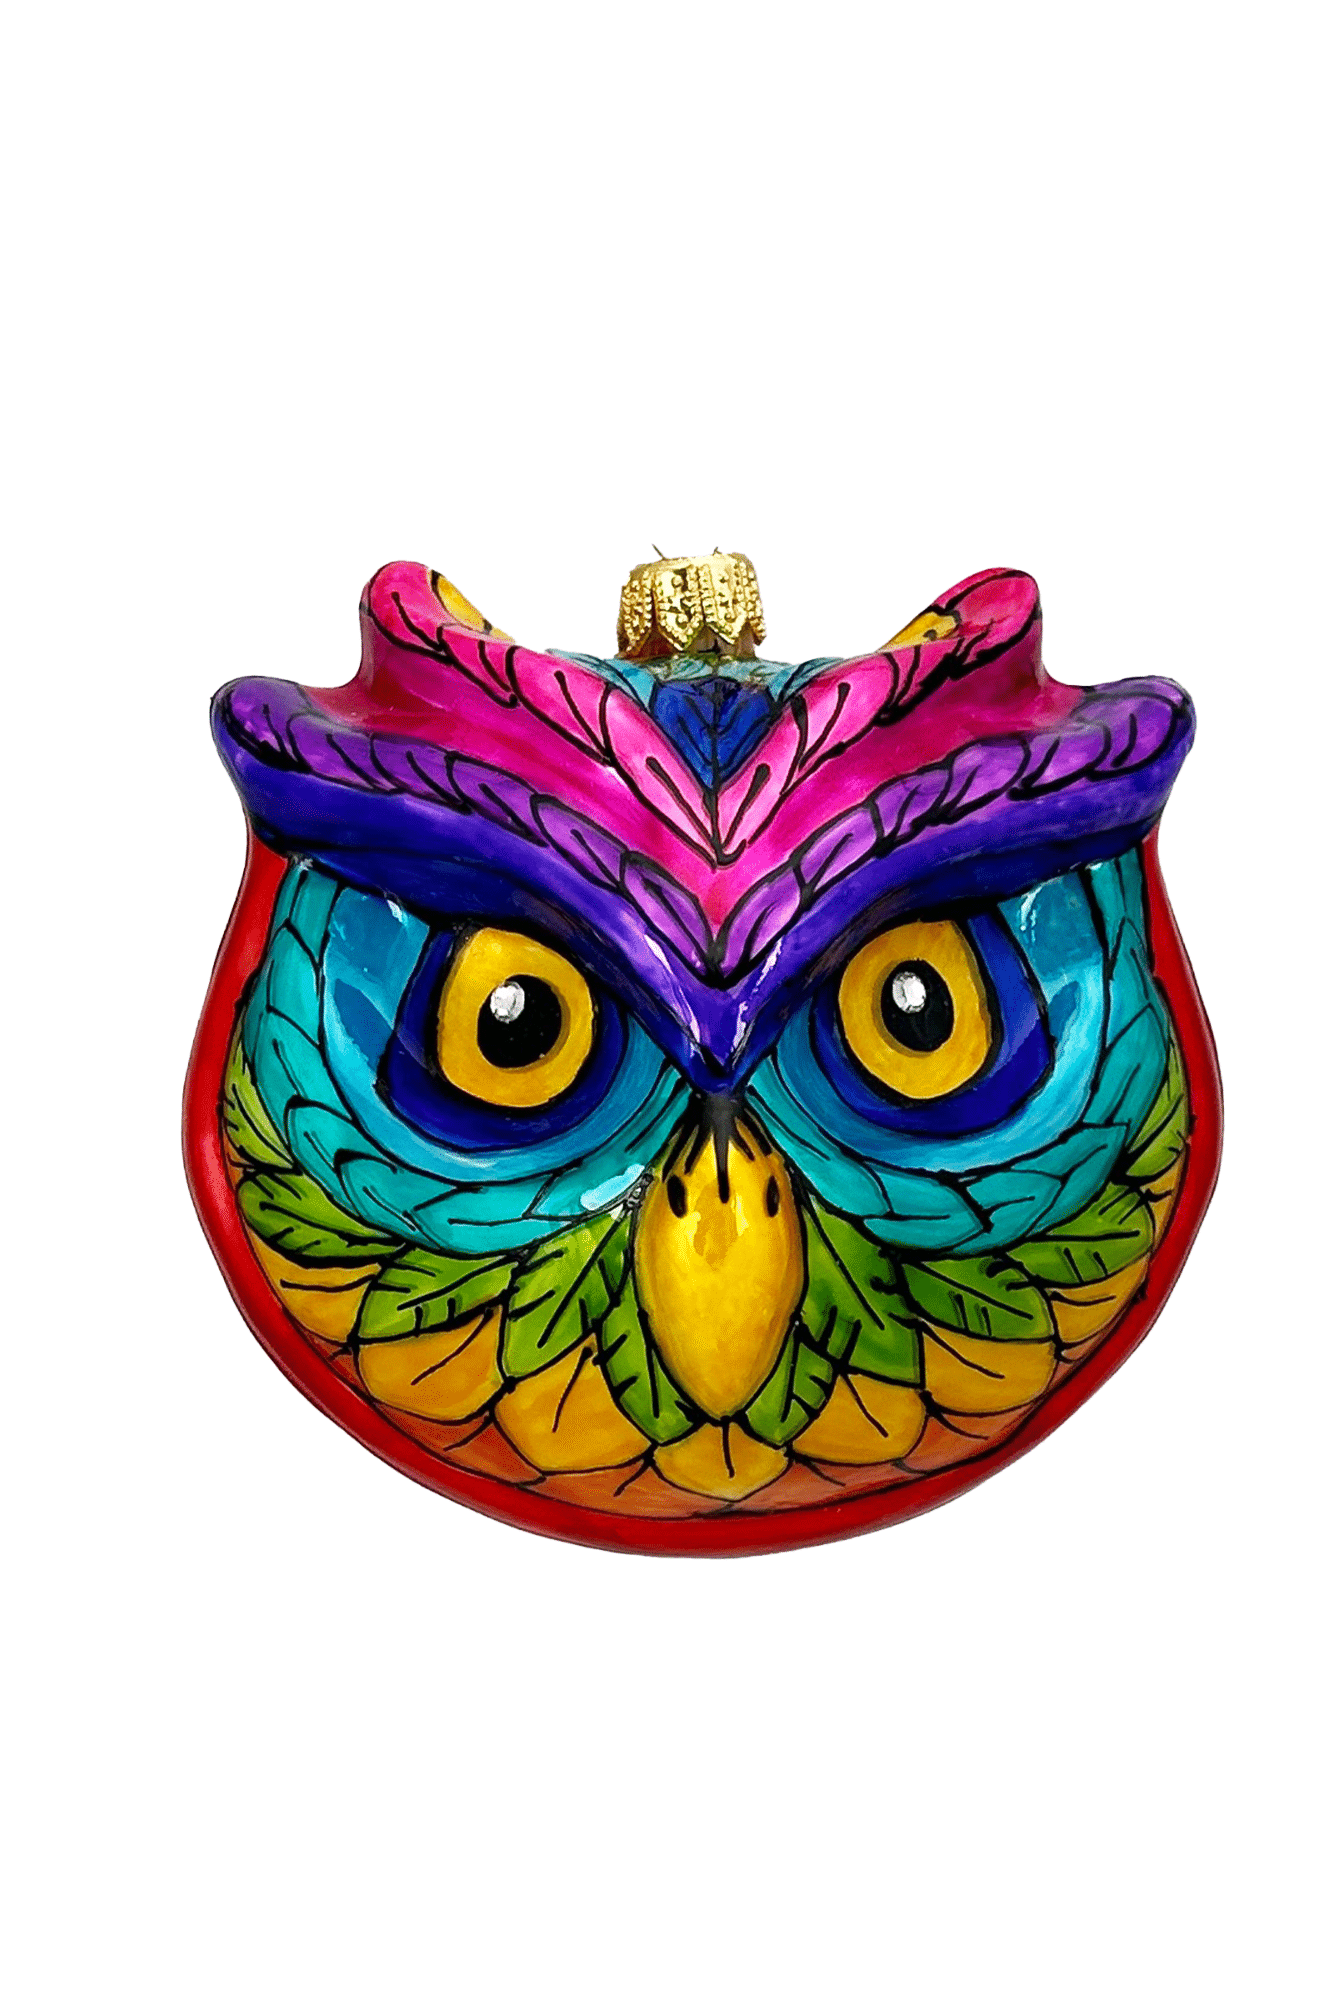 rainbow saturated colors owl face ornament with big eyes and beak. hnad painted in intricate linework details. handmade in poland